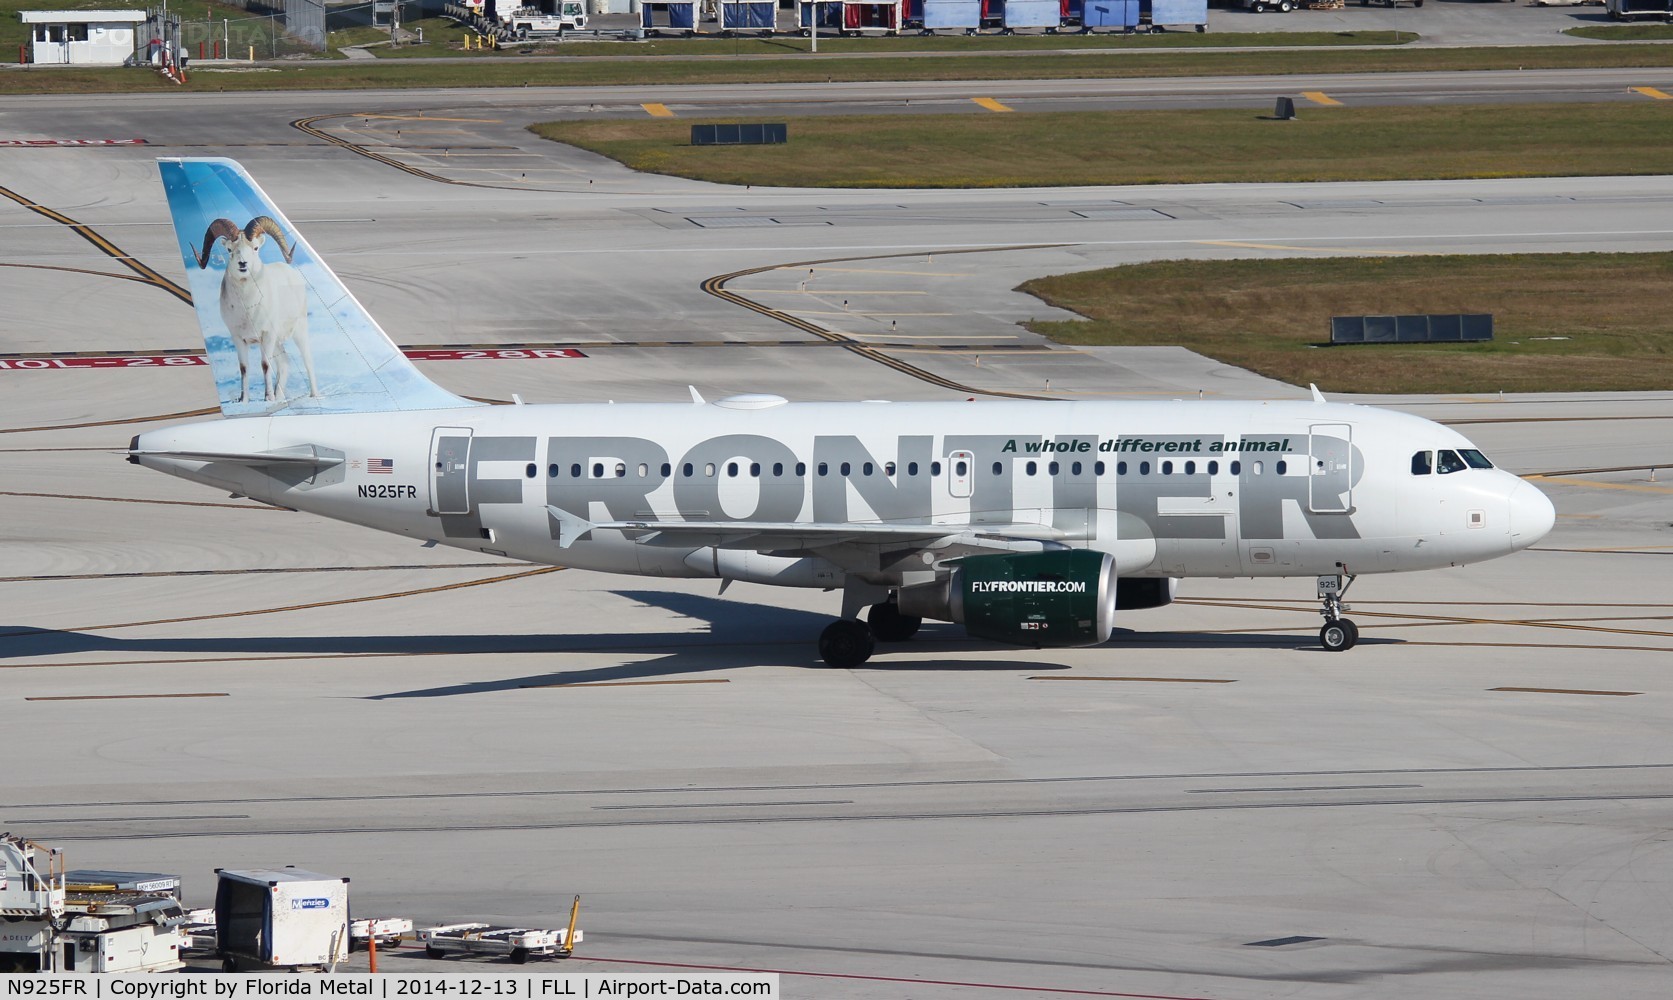 N925FR, 2004 Airbus A319-111 C/N 2103, Frontier Dale the Dall Ram